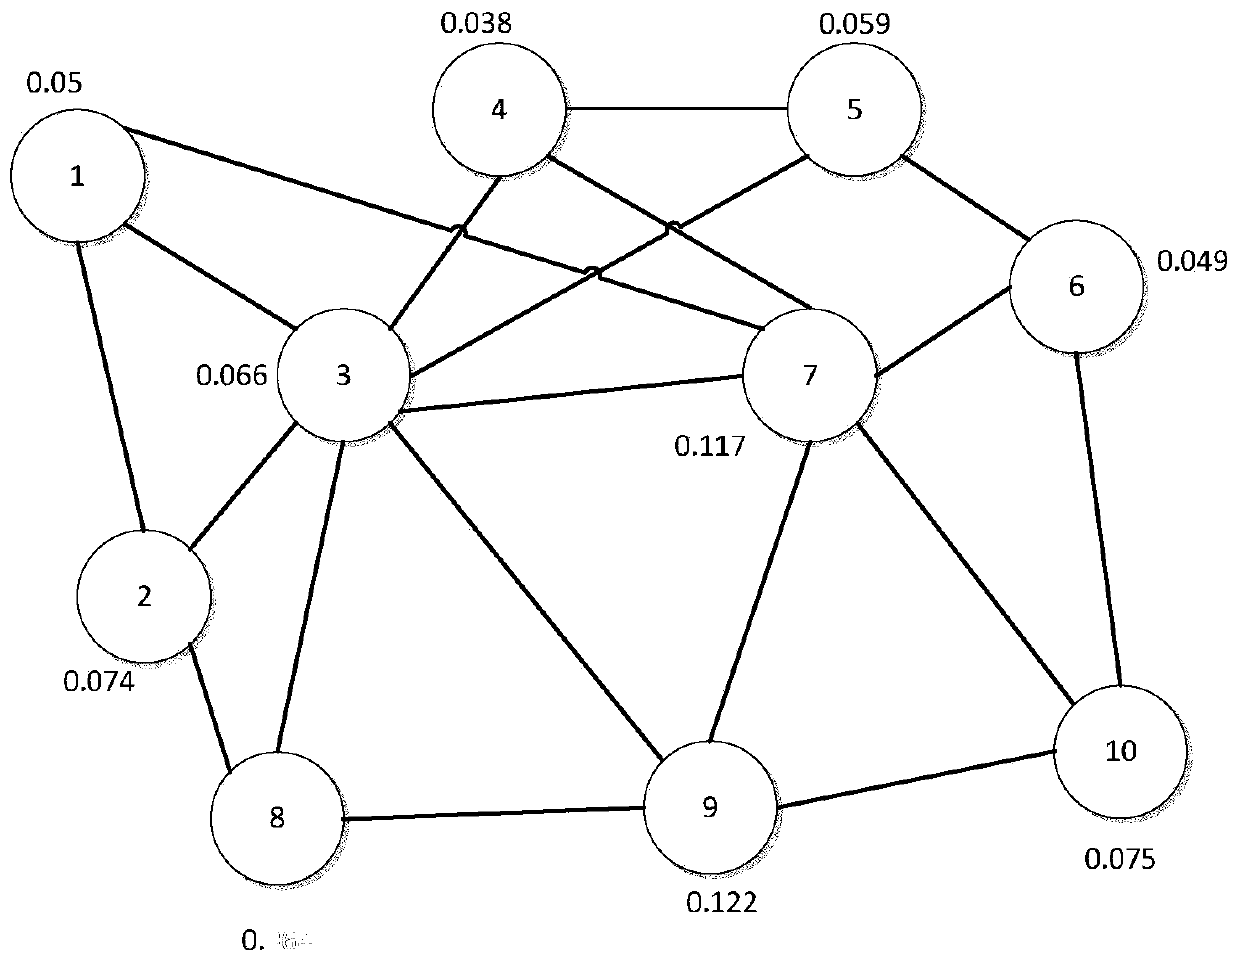 Graph model text abstract generation method based on word frequency and semantics